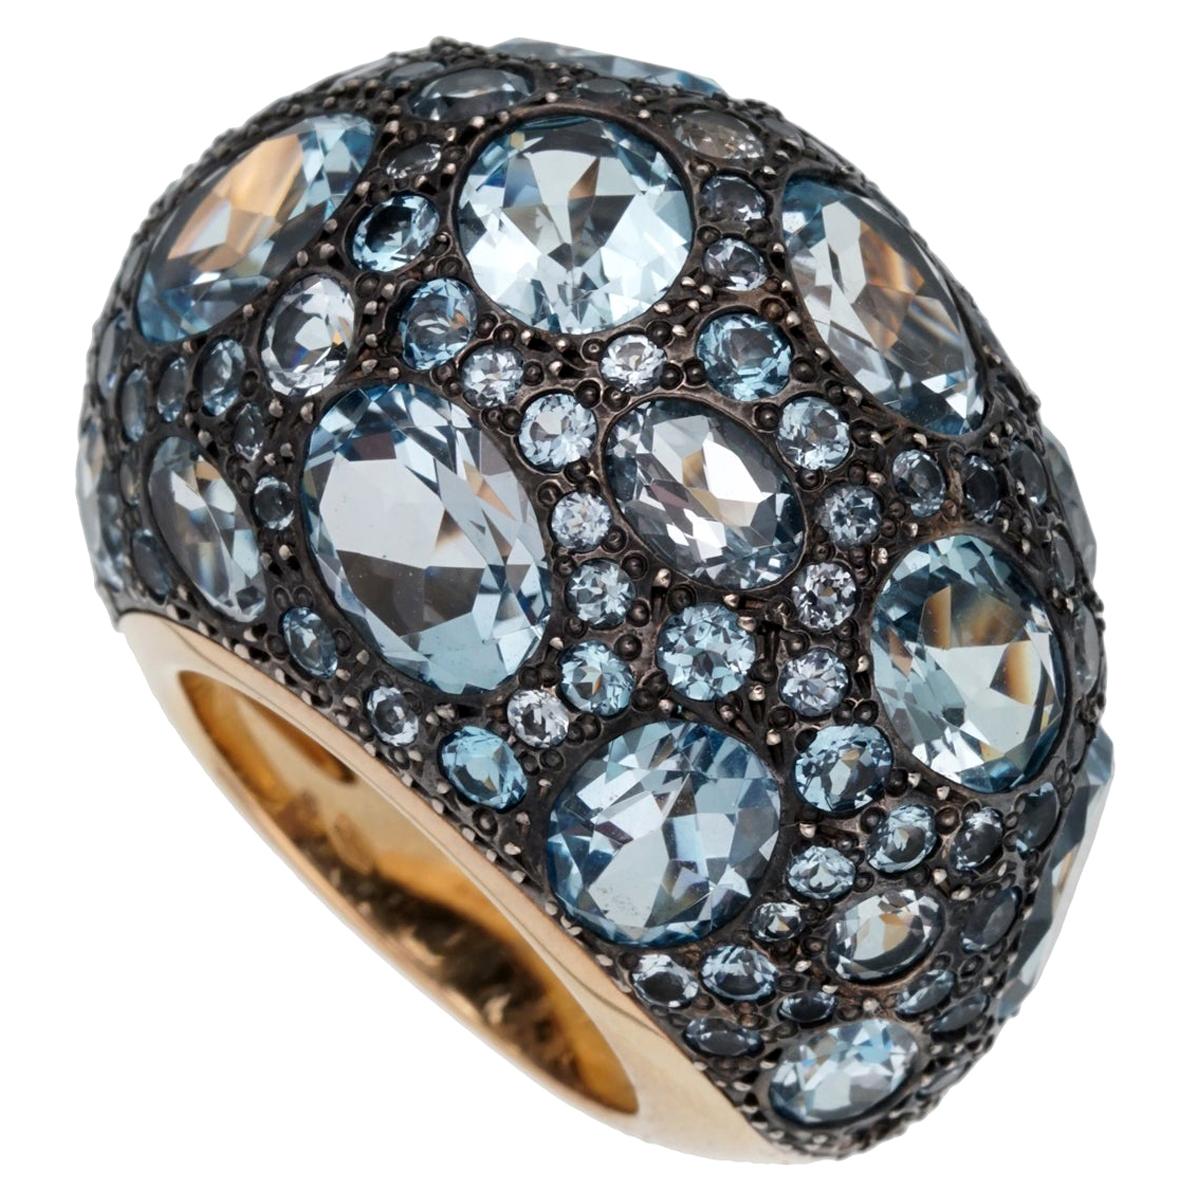 A magnificent bombe style brand new ring by Pomellato showcasing 12ct of multiple shaped topaz set in shimmering 18k rose gold. The ring measures a size 5 3/4 and can be resized.

Pomellato Retail Price: 9000
Sku: 2459